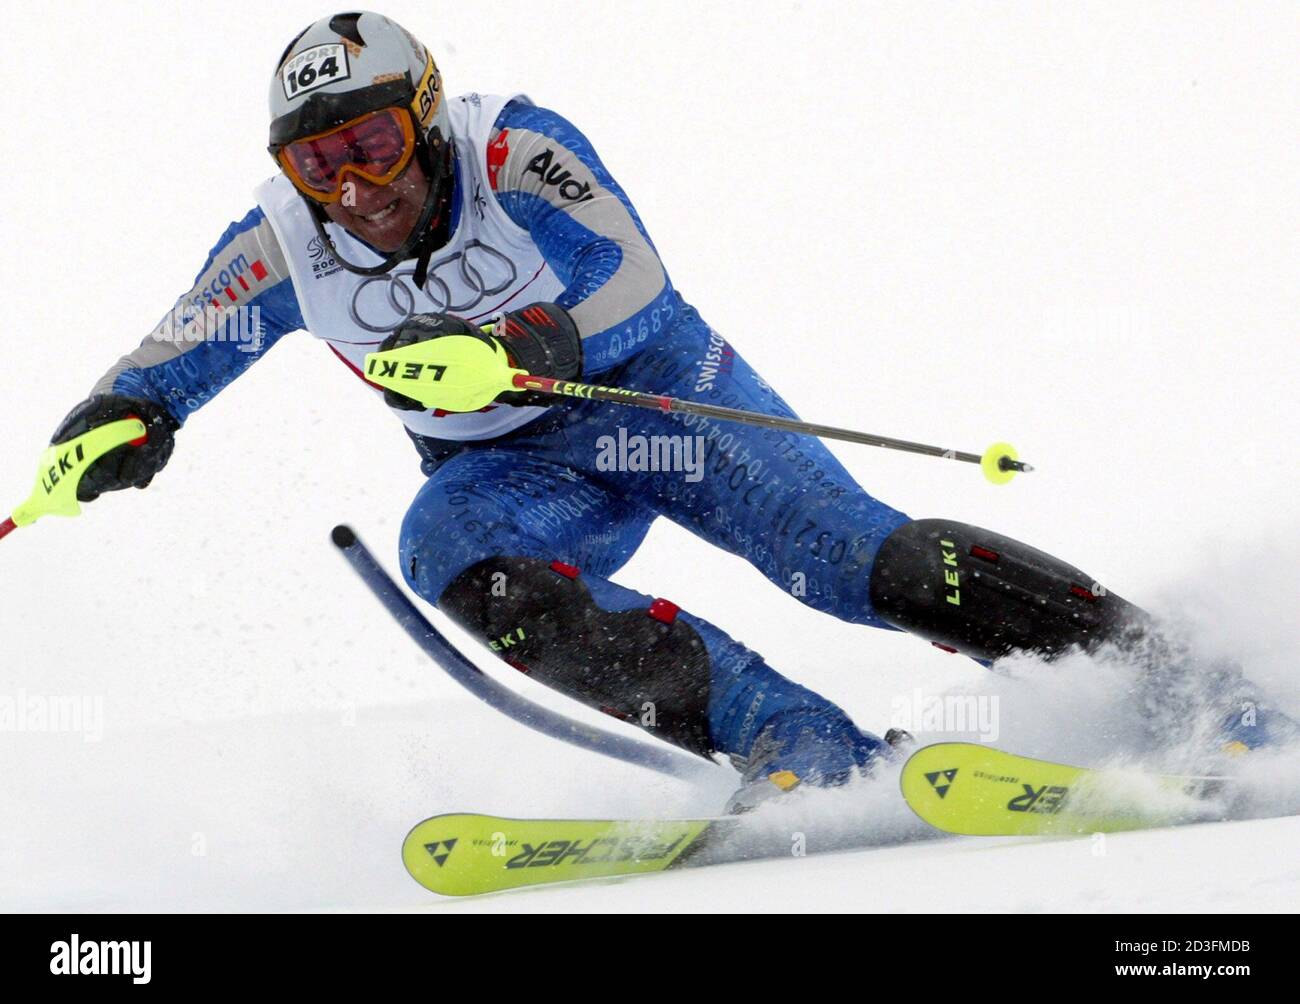 Silvan Zurbriggen of Switzerland in action during the Combined event at the  World Alpine Skiing Championships in St. Moritz on February 6, 2003. Bode  Miller of the United States won the Gold